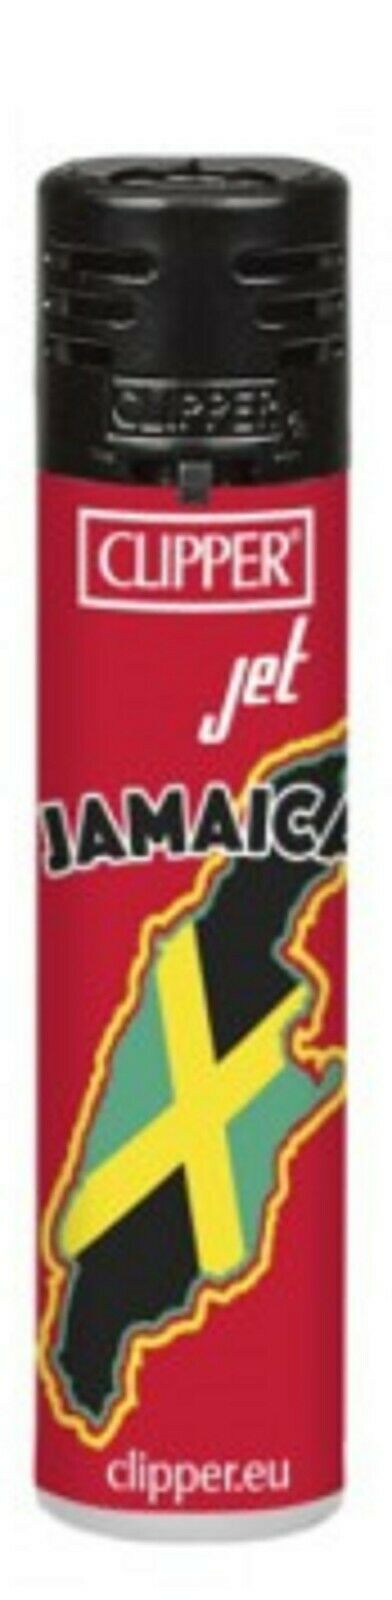 clipper lighter New Jet flame Jamaica  genuine product Rare Collectable